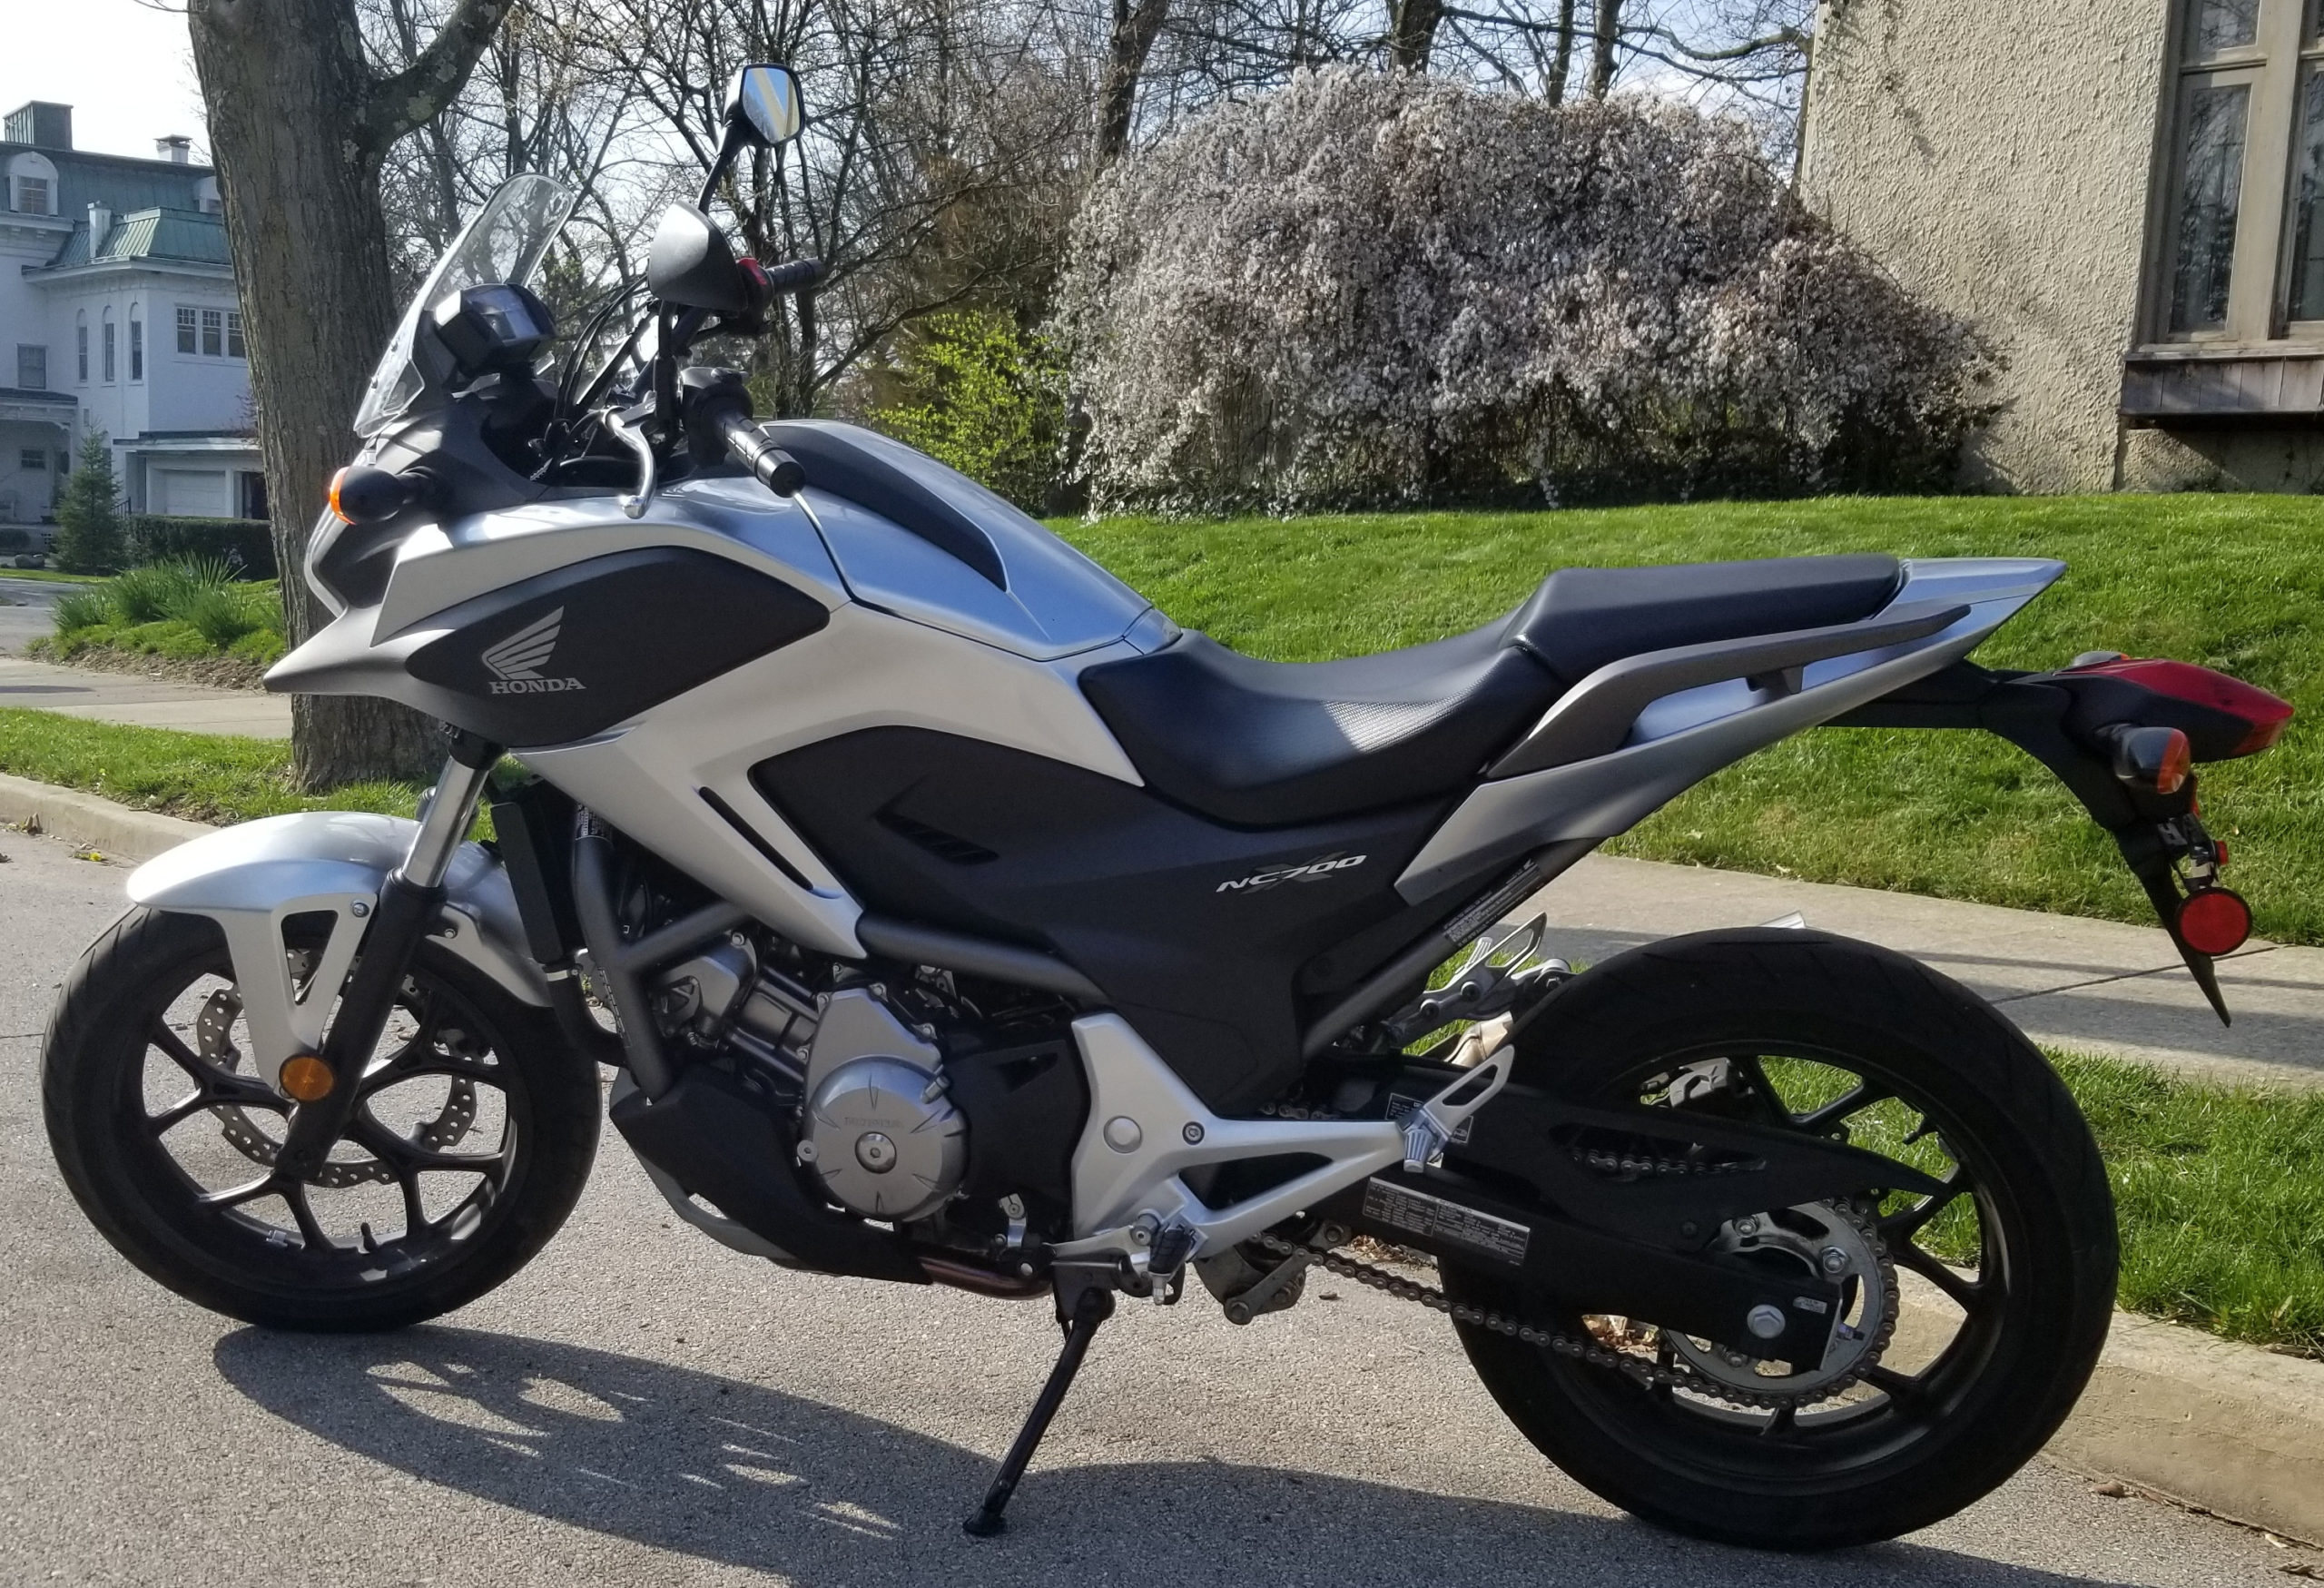 Another new bike!